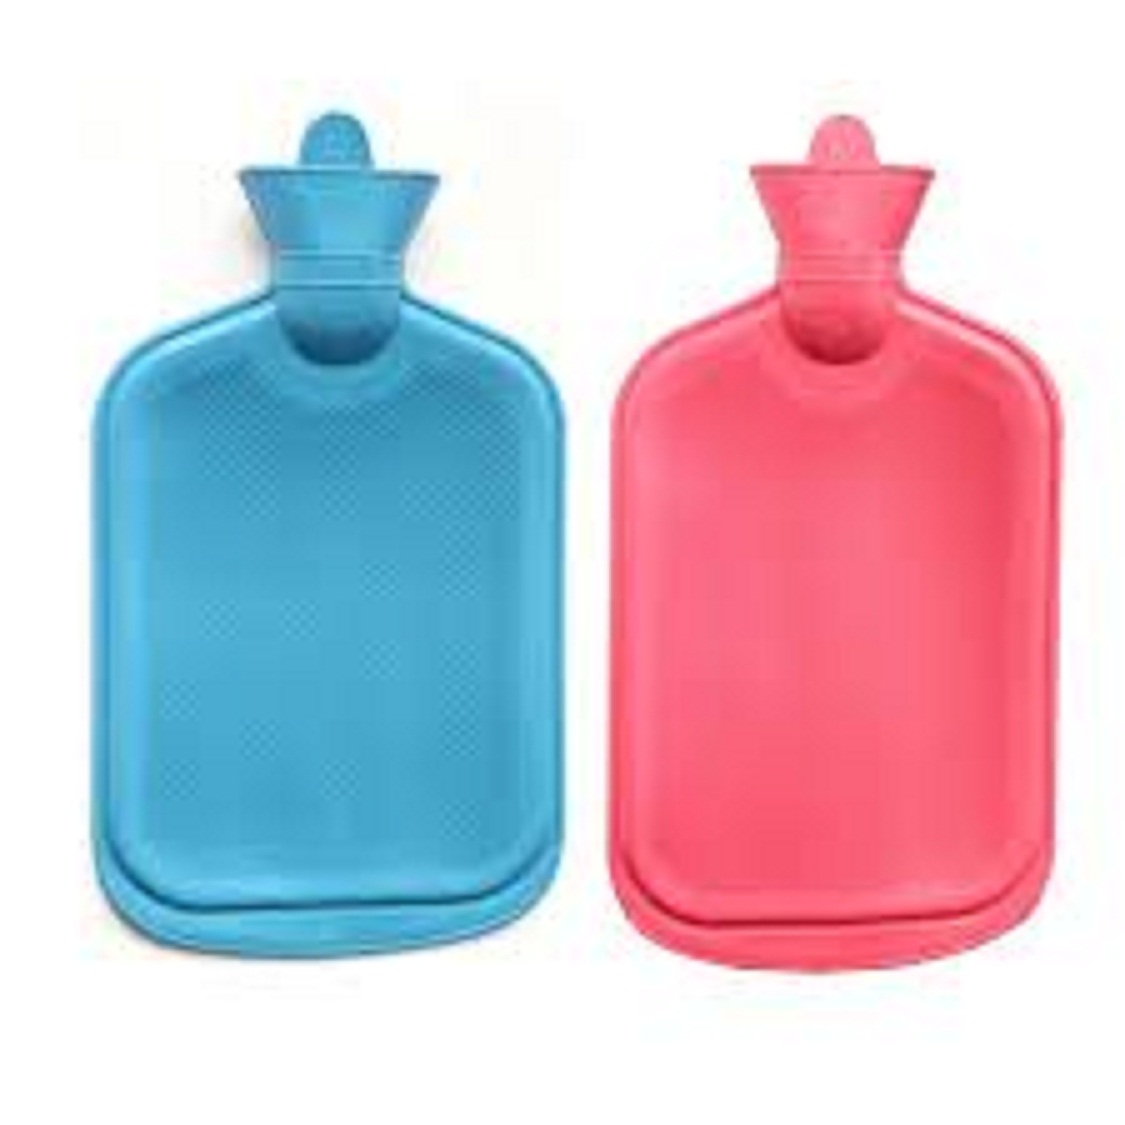 Buy Set of 2 Hot water rubber bags assorted colors Online - Get 43% Off